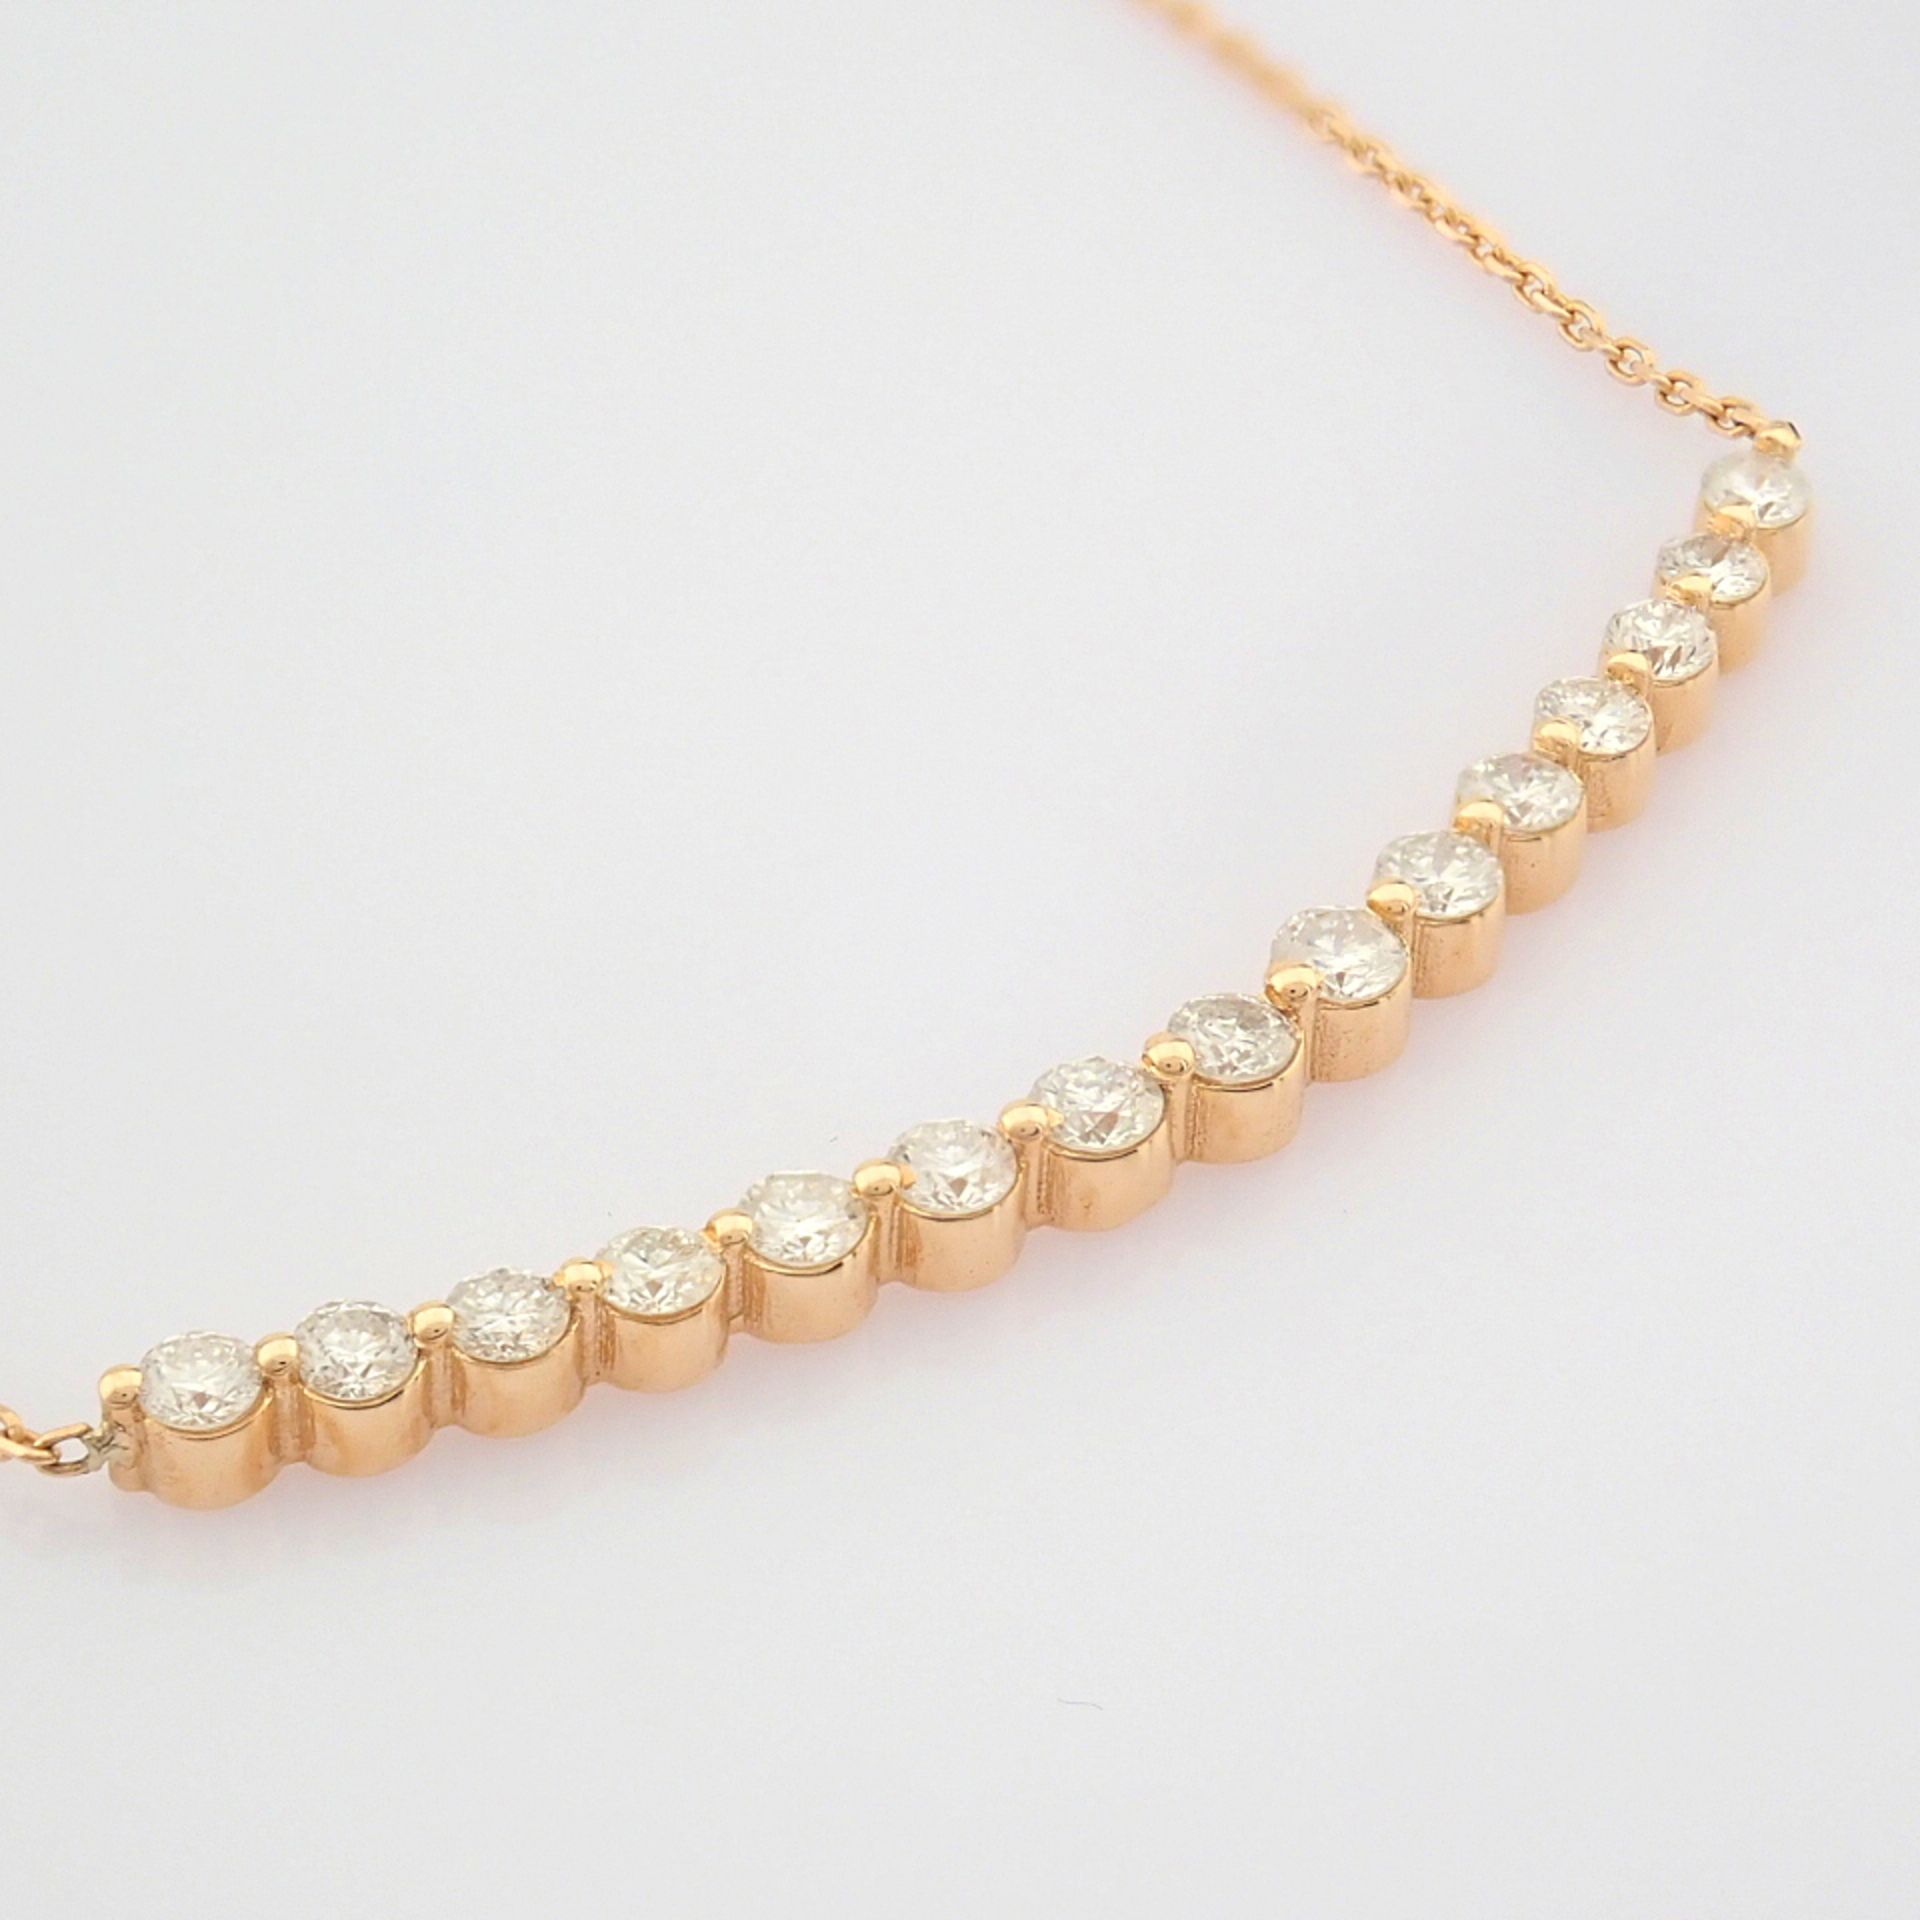 Certificated 14K Rose/Pink Gold Diamond Necklace (Total 0.49 ct Stone) - Image 5 of 9